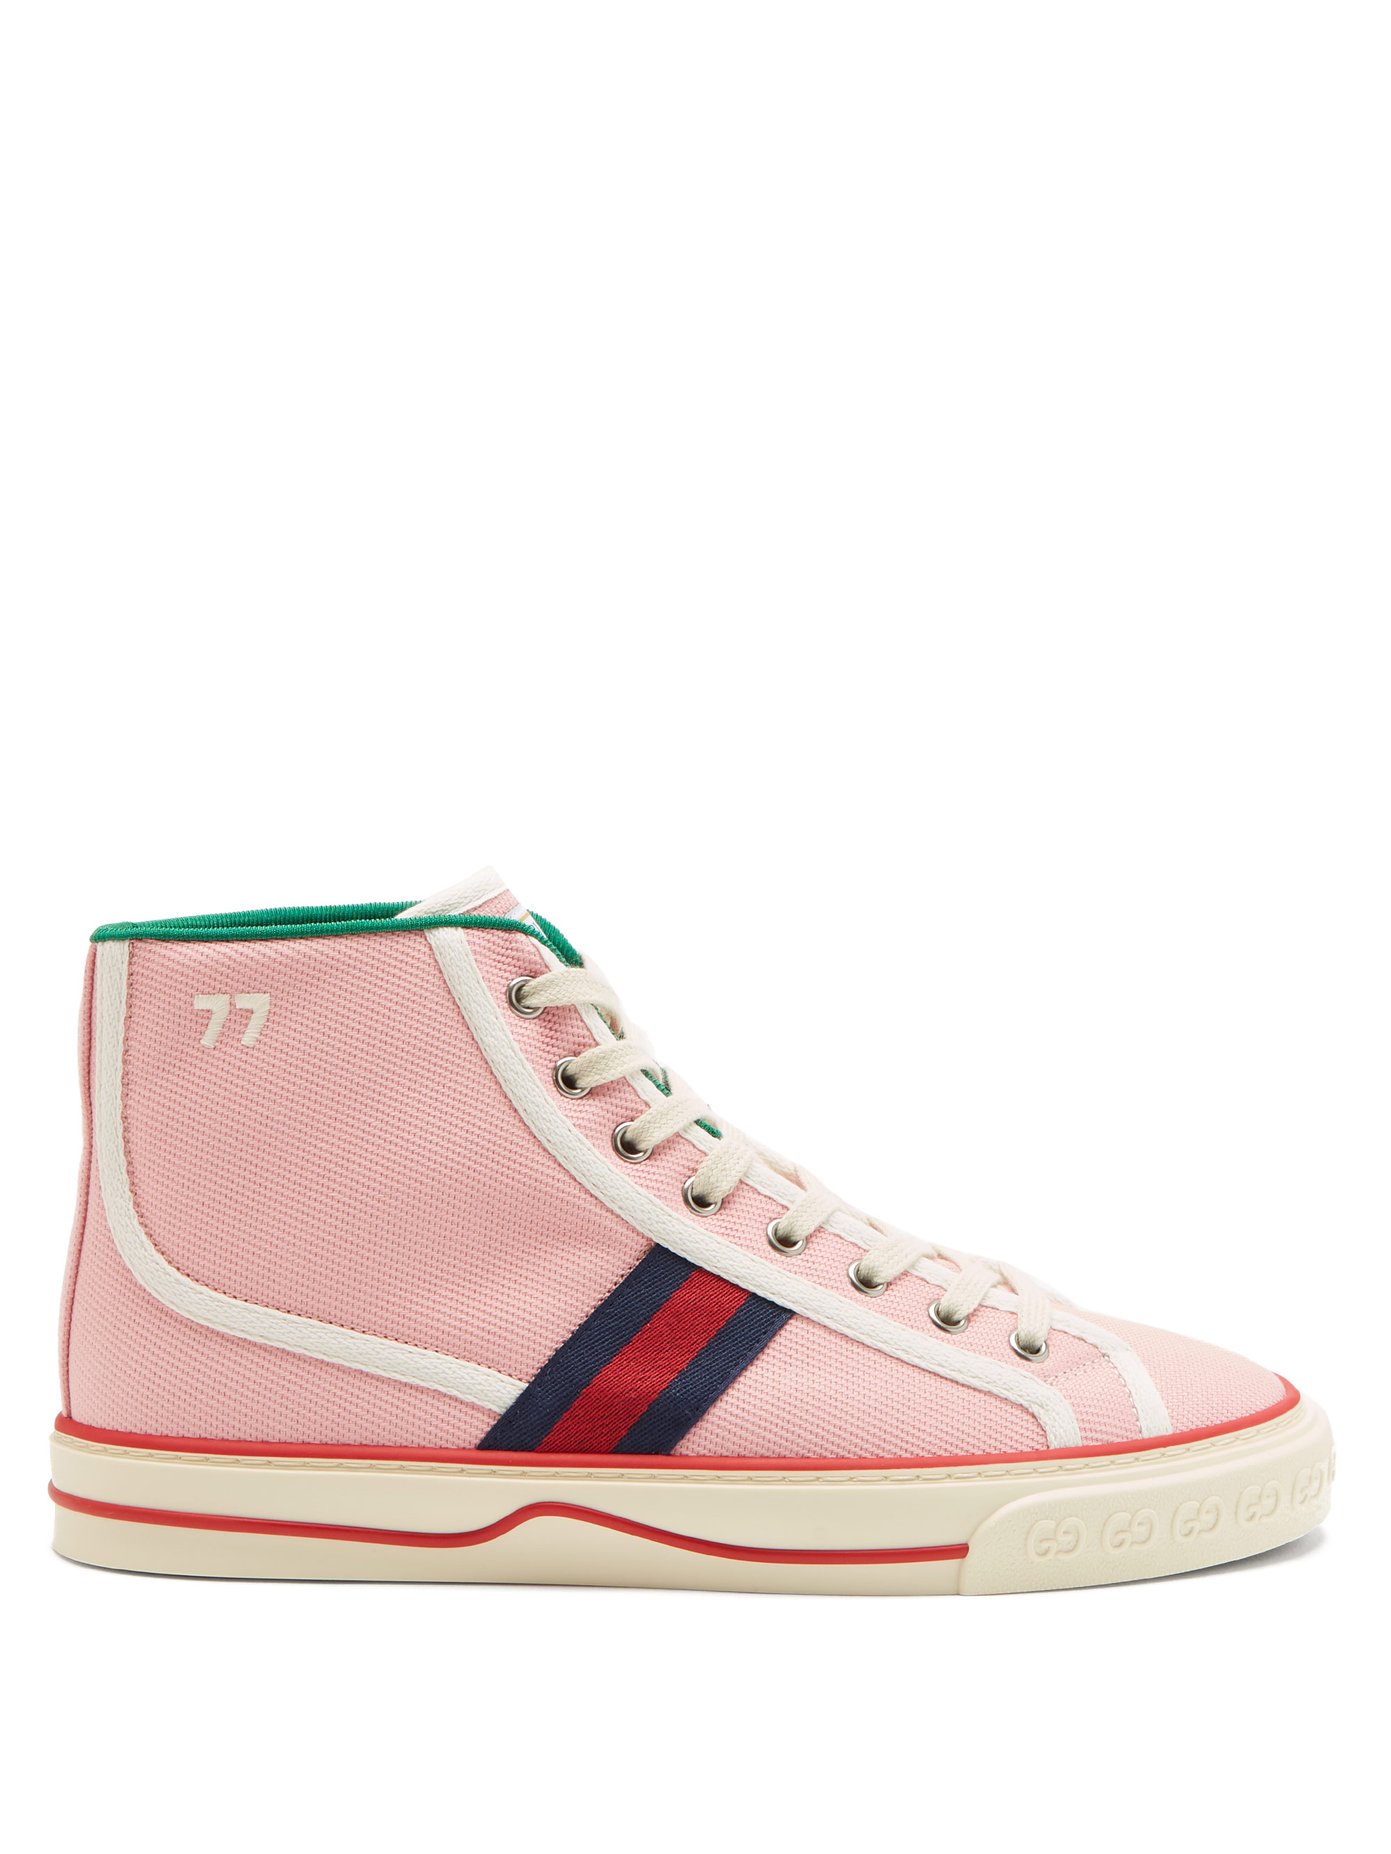 gucci high top trainers womens